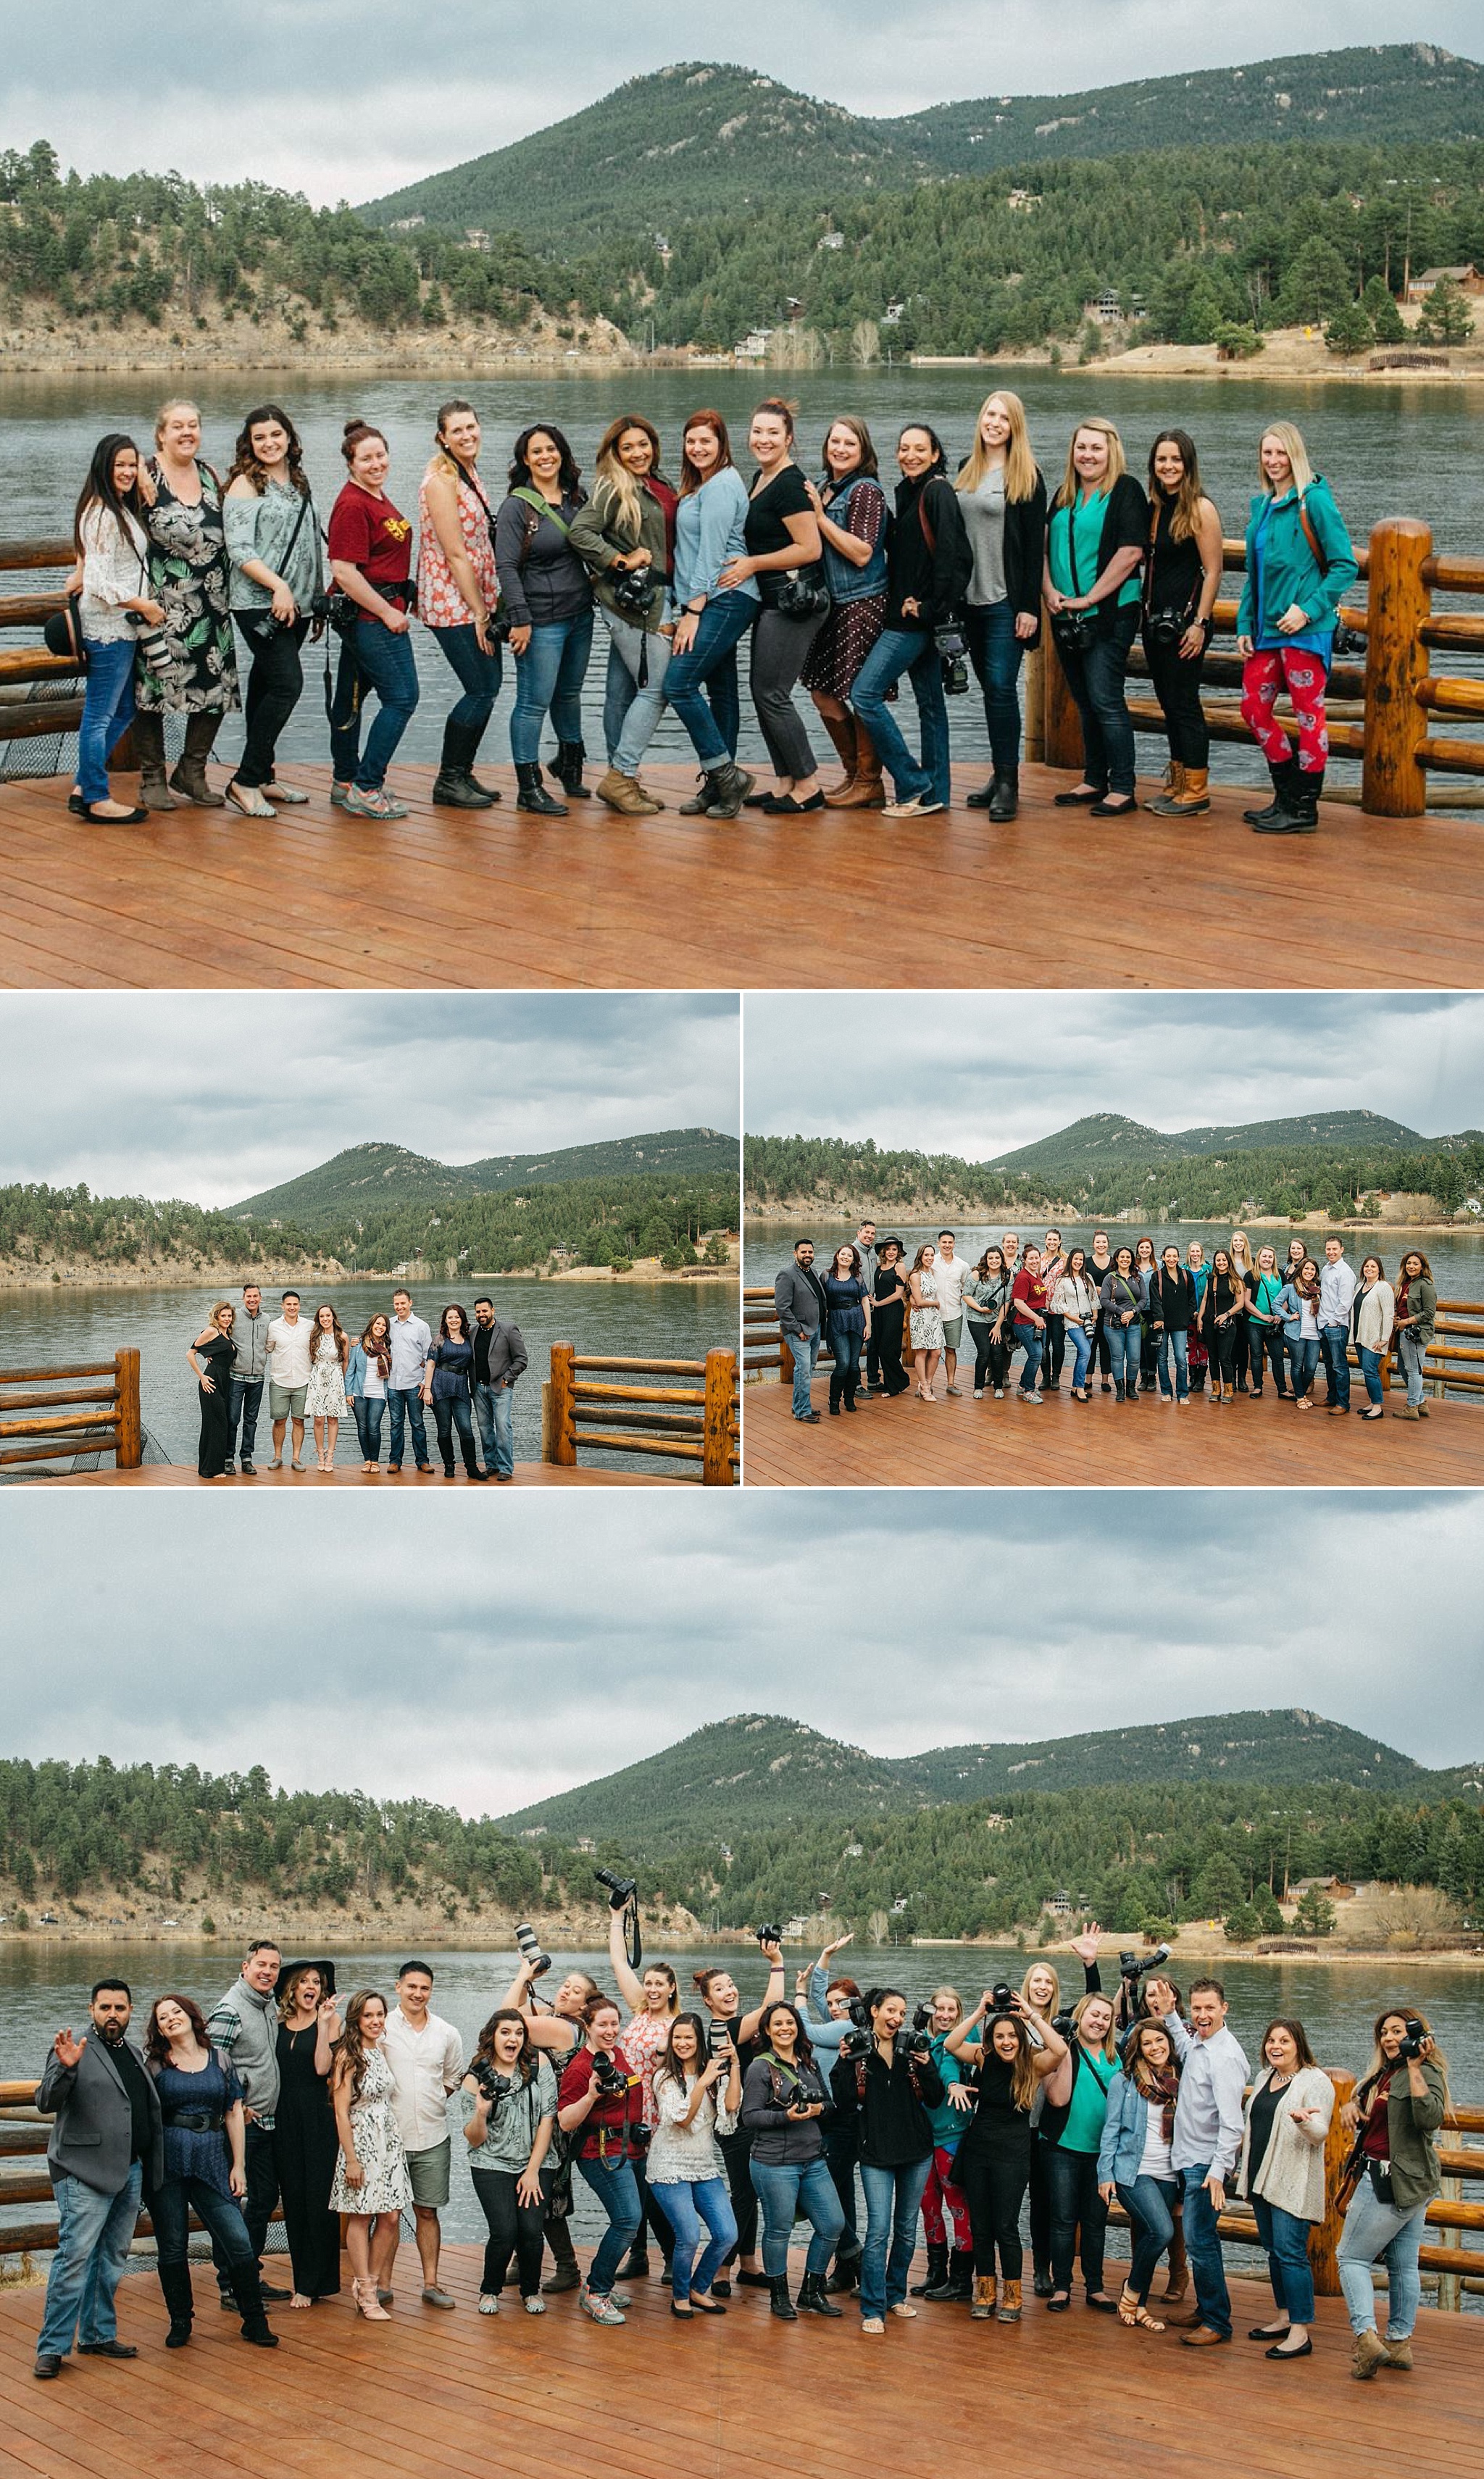 Group picture of all the photographers and models at the end of the Epic Engagement Workshop at Evergreen Lake House.